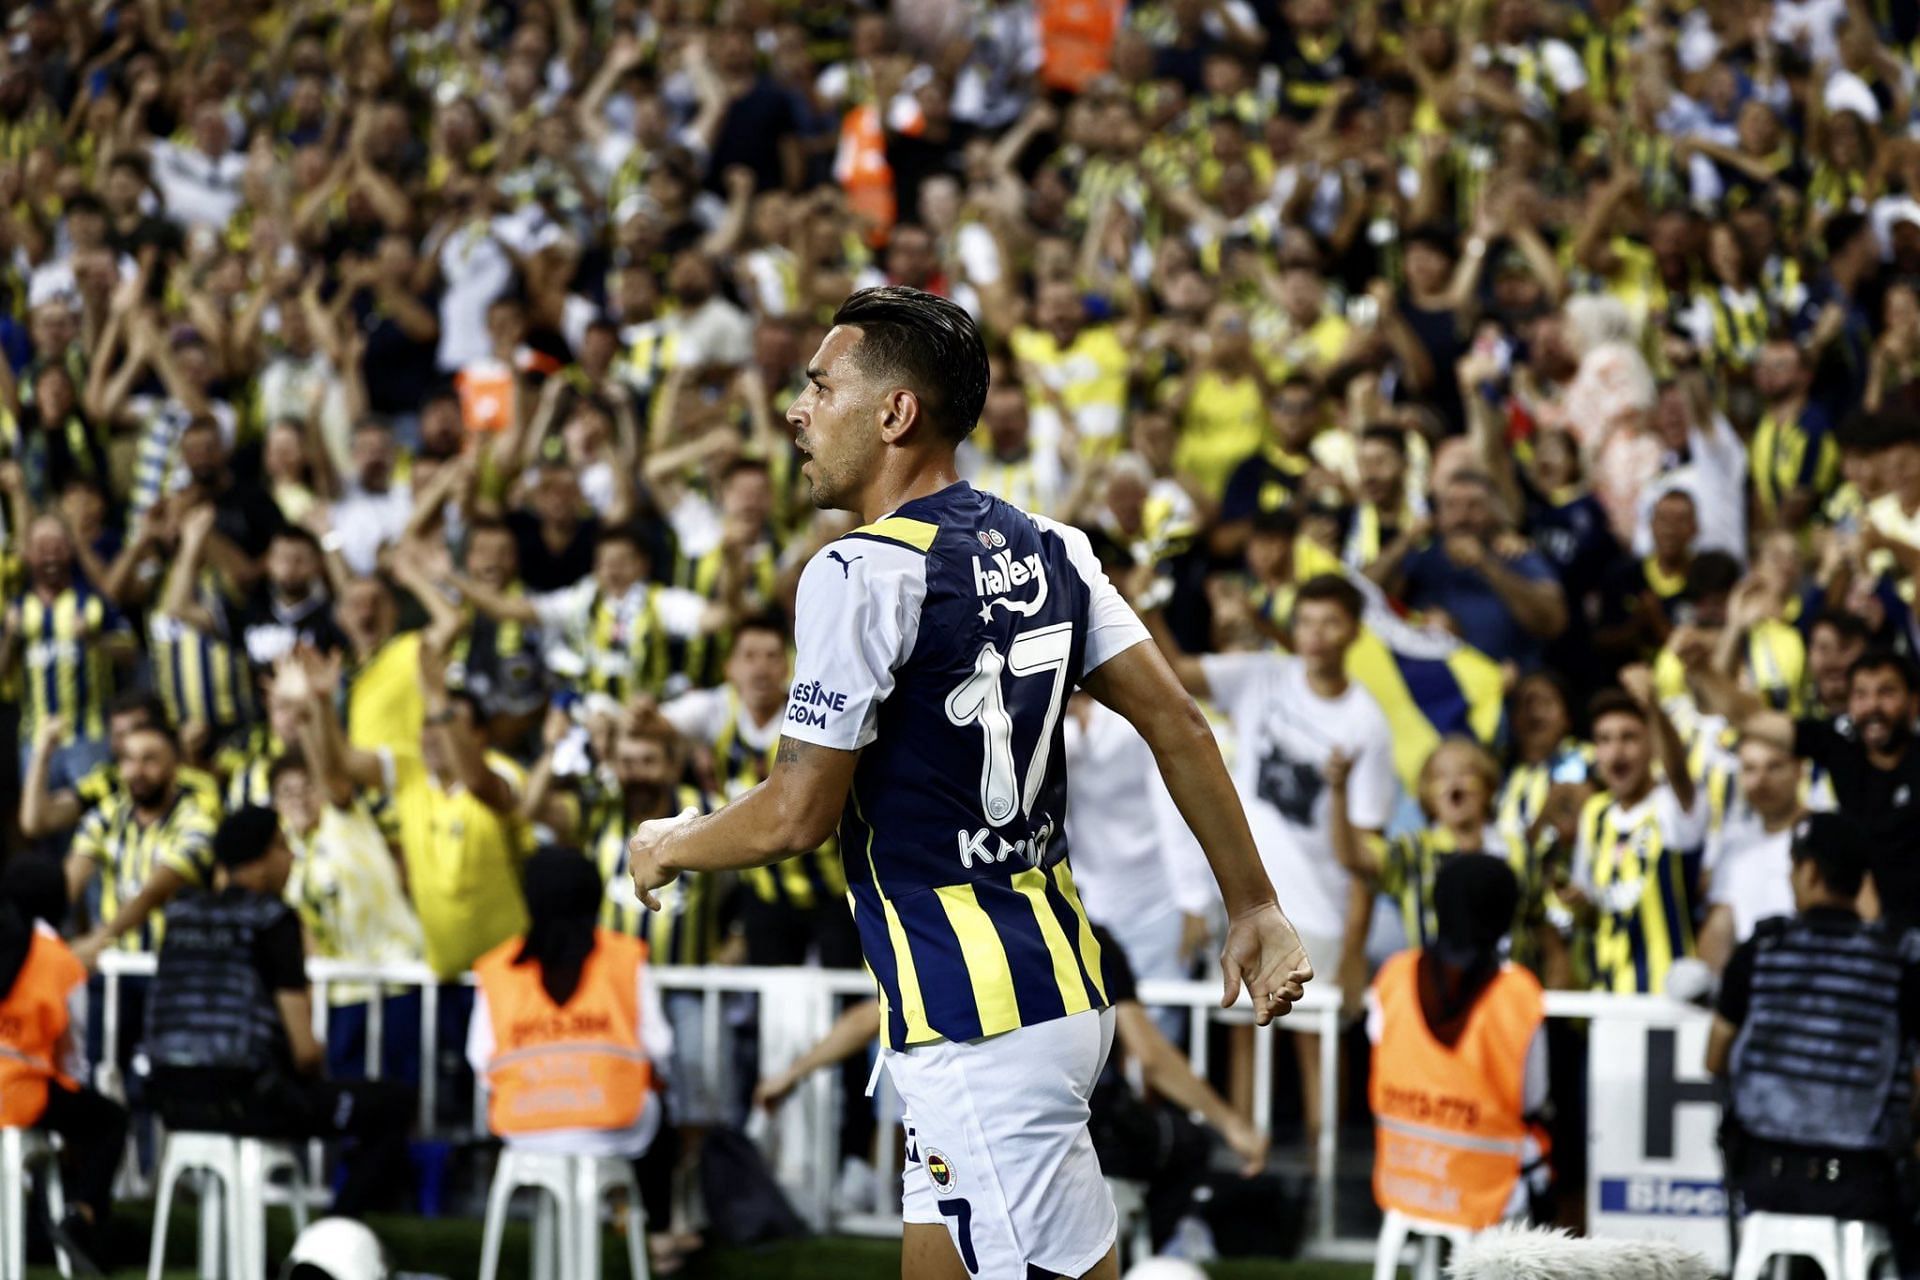 Fenerbahce take on Twente in the Conference League playoff on Thursday